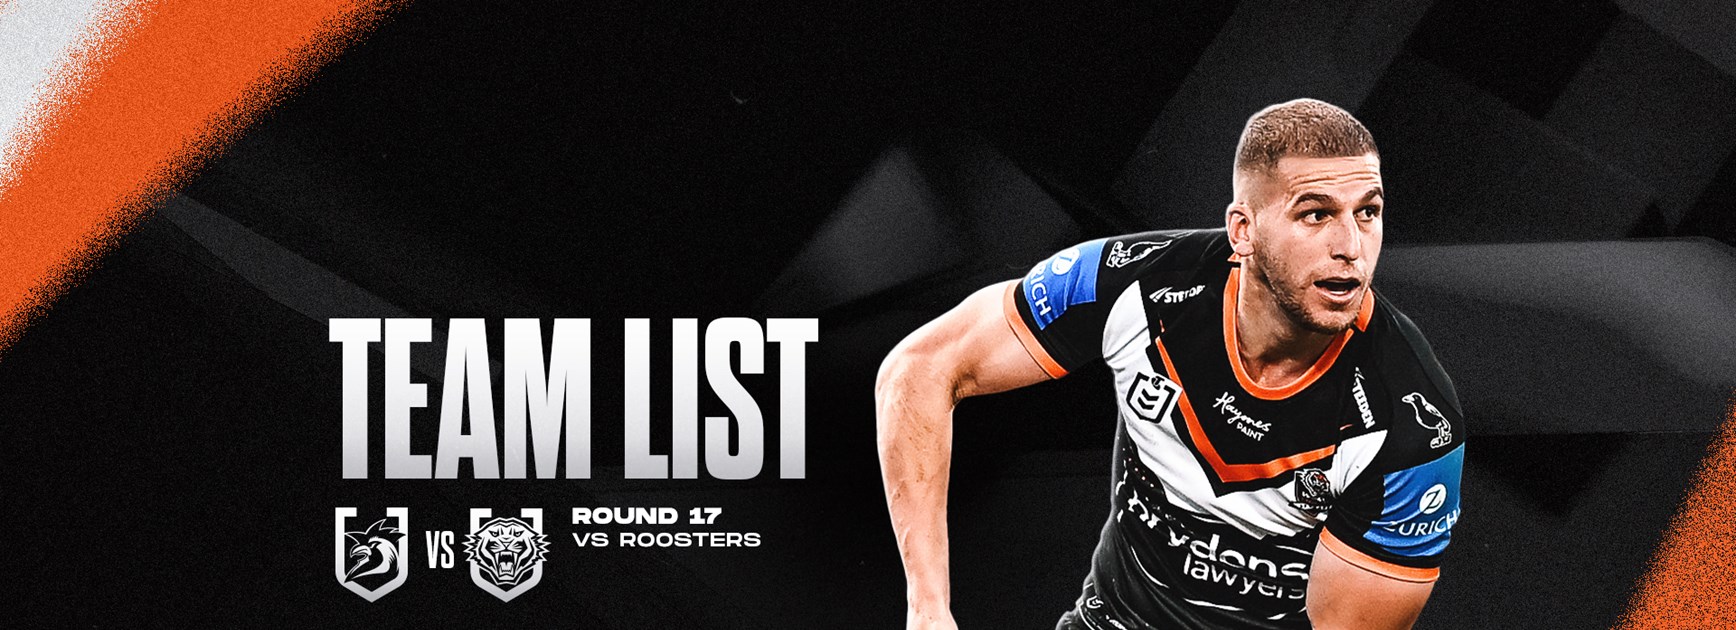 Team List: NRL Round 17 vs Roosters